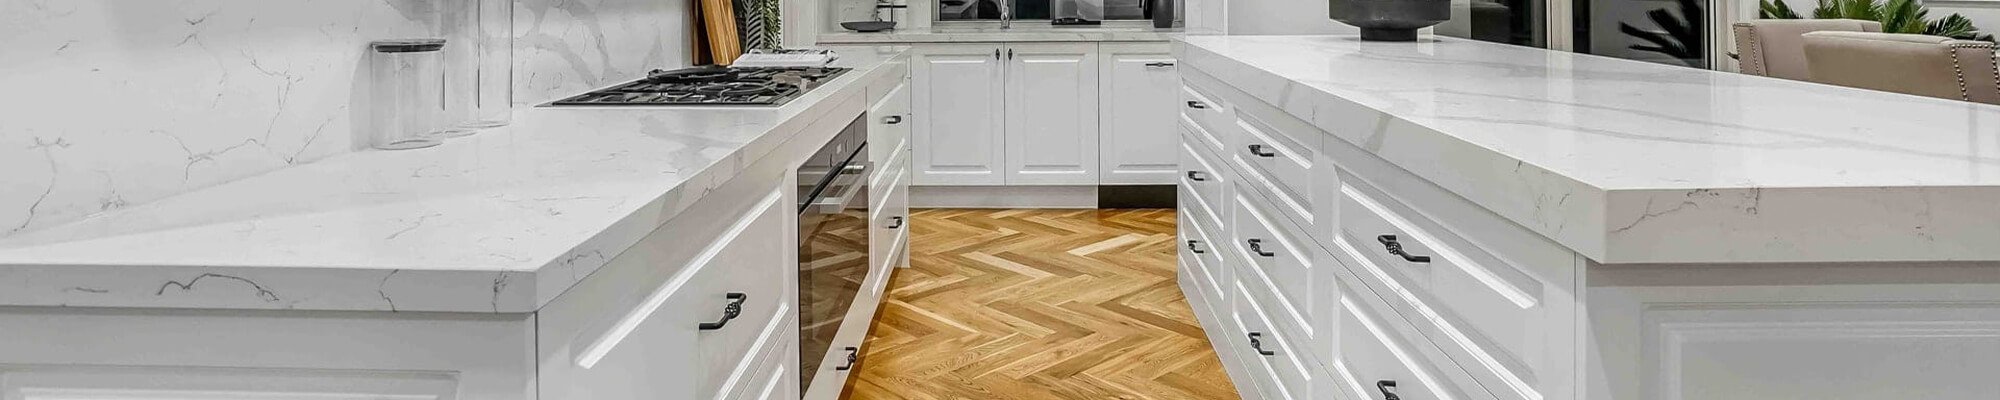 Contact Majestic Flooring & Design in Boise